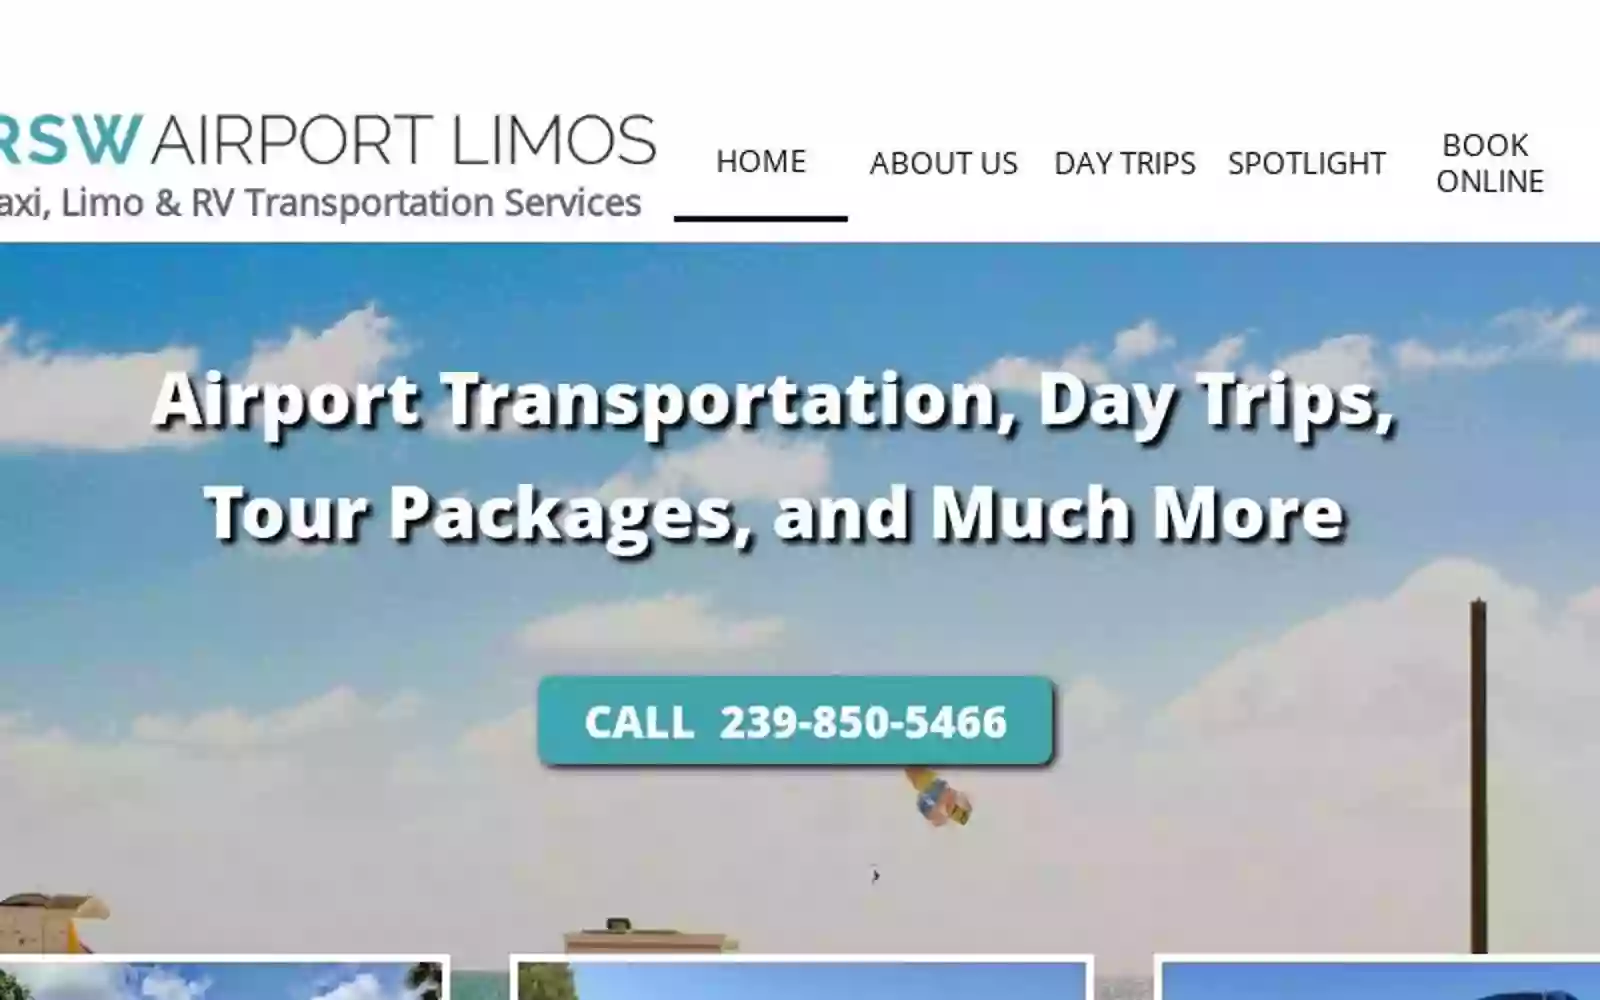 RSW Airport Limos